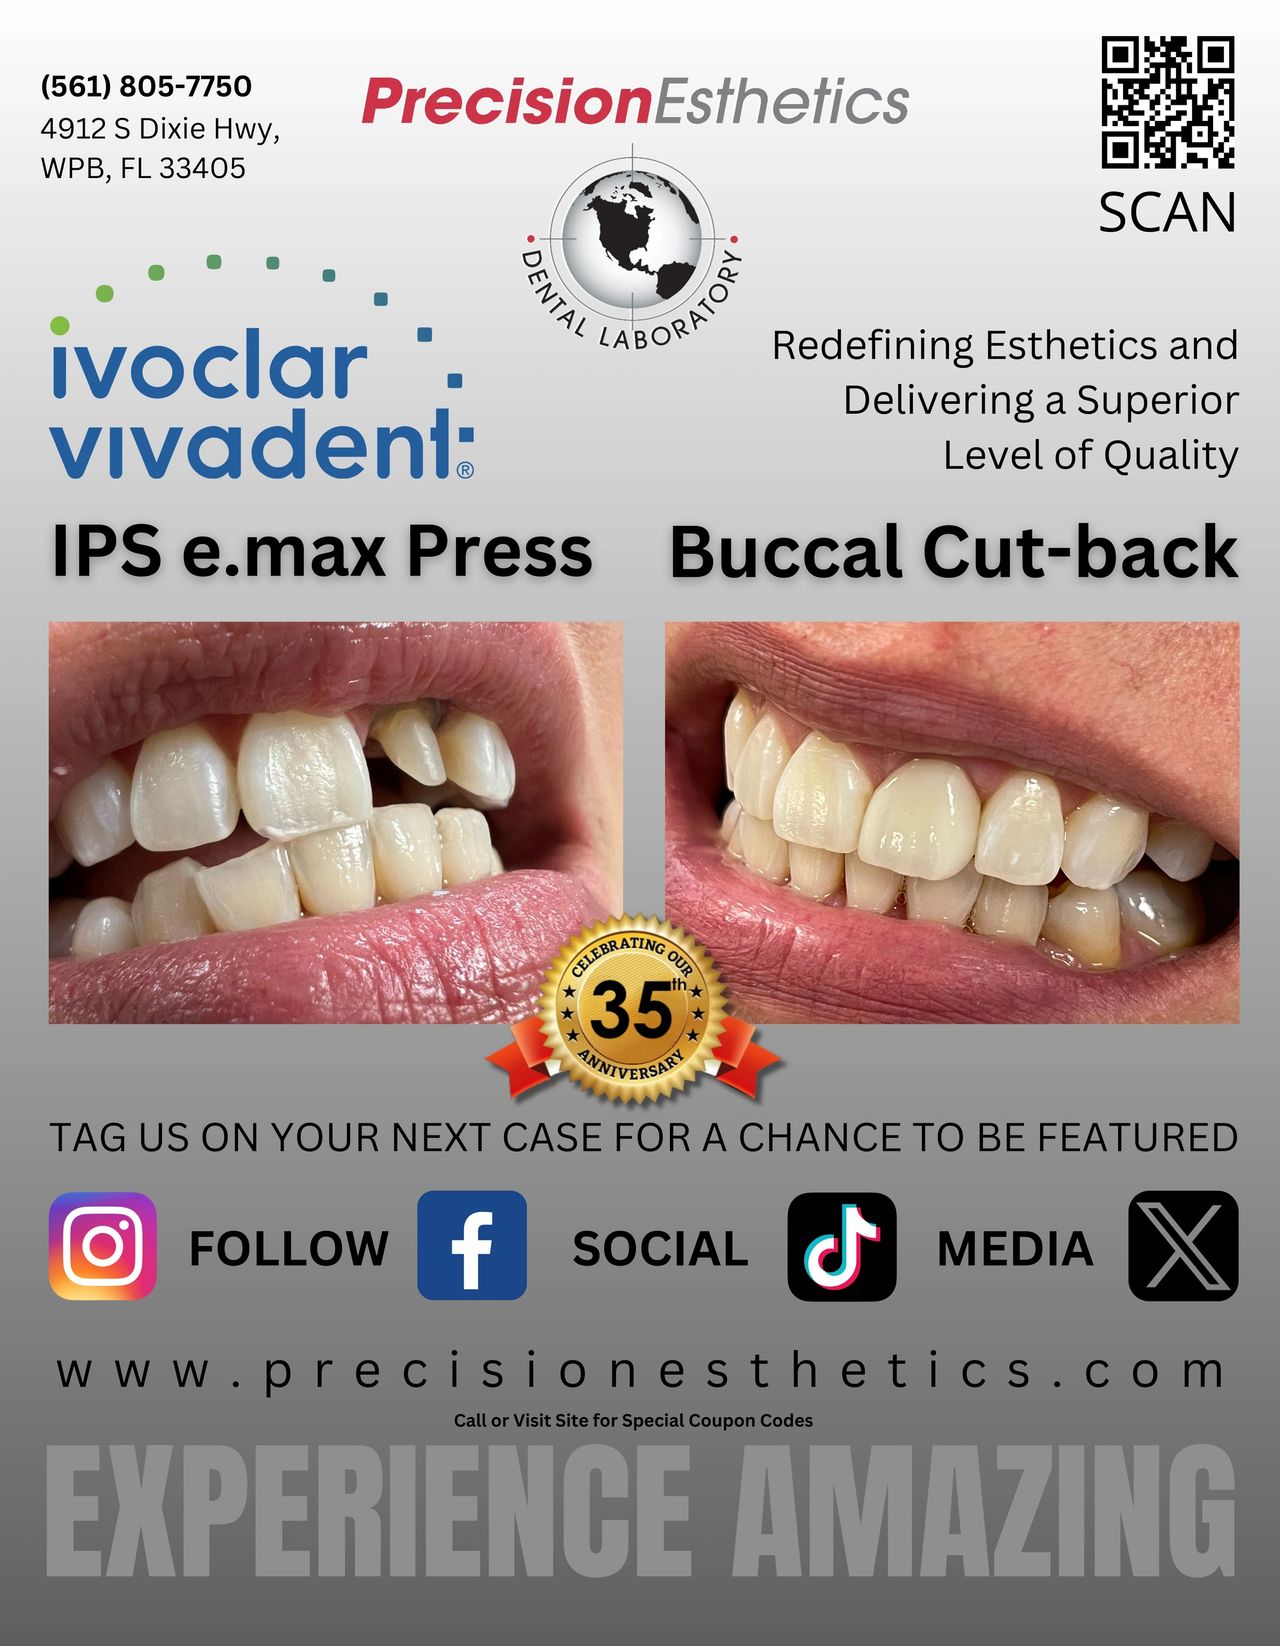 IPS e.max Press, The #1 Solution for Veneers, Crowns, and Bridges